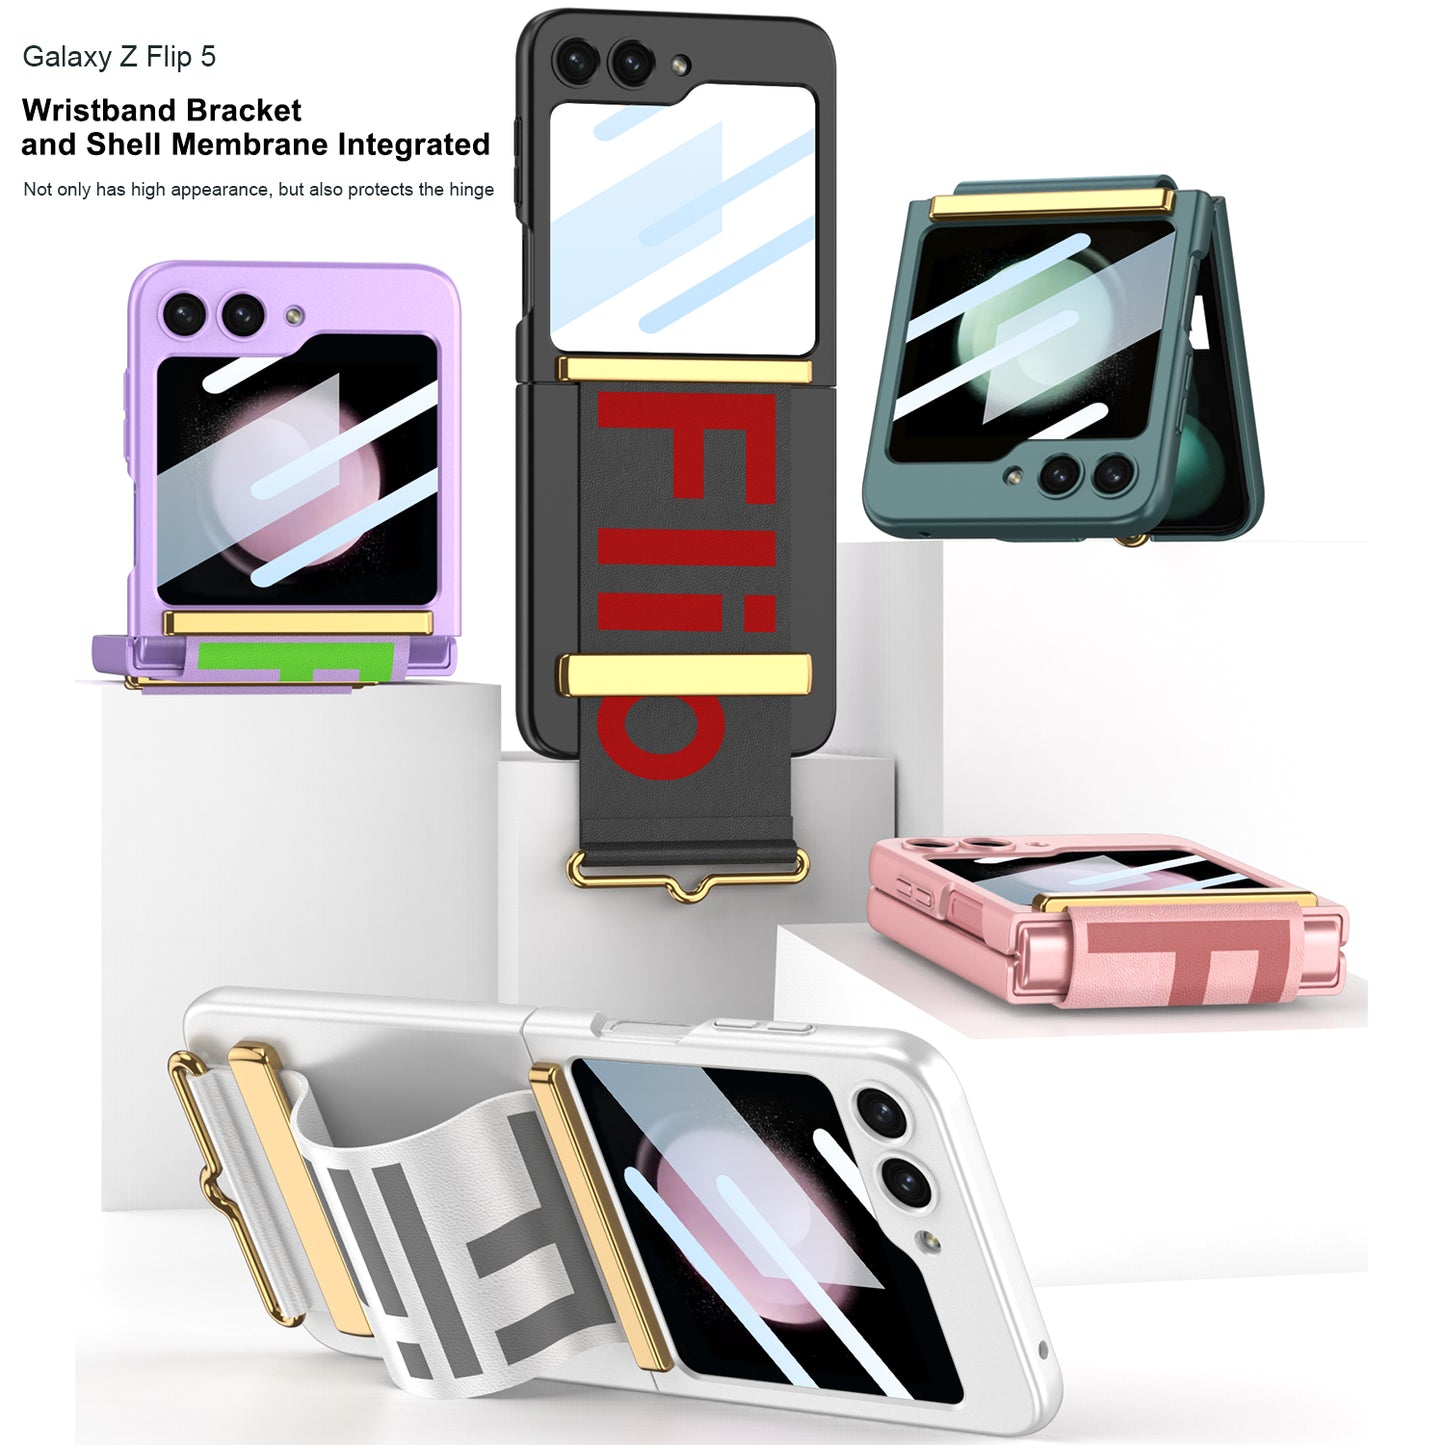 Samsung Galaxy Z Flip5 Wristband Case Ultra-thinFrosted Hard Shell With Tempered Glass Protector